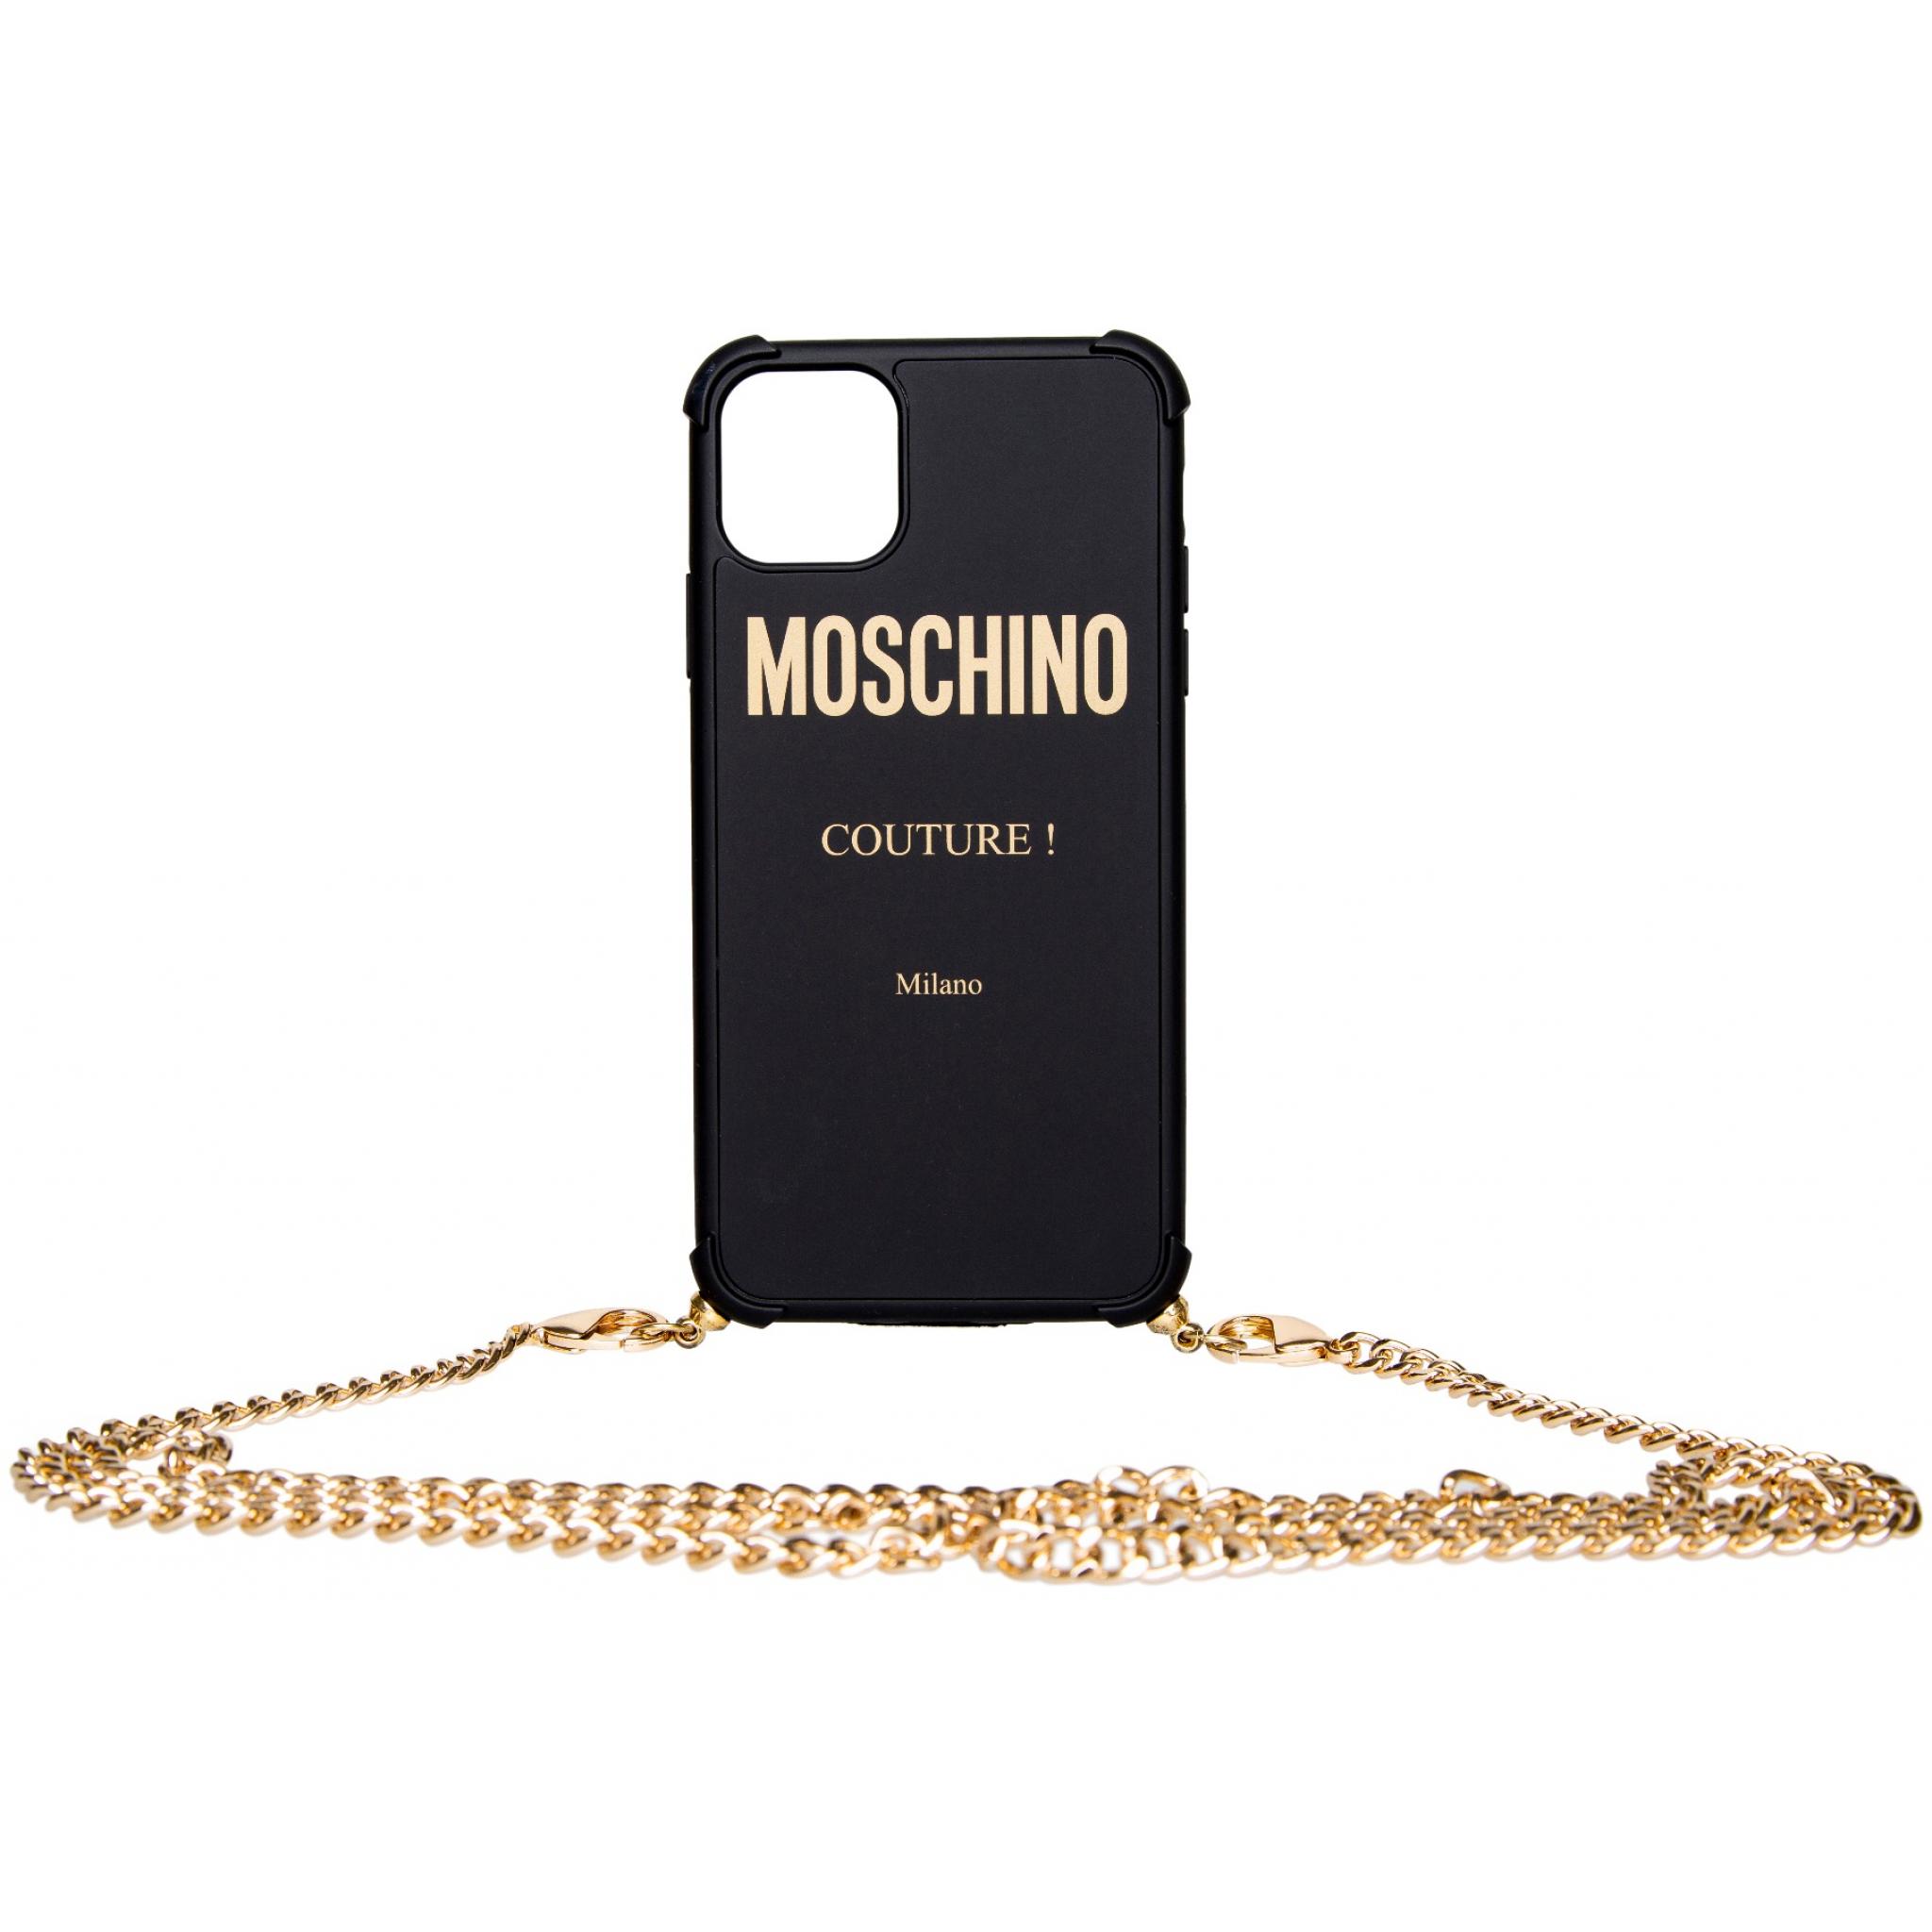 moschino phone case with strap